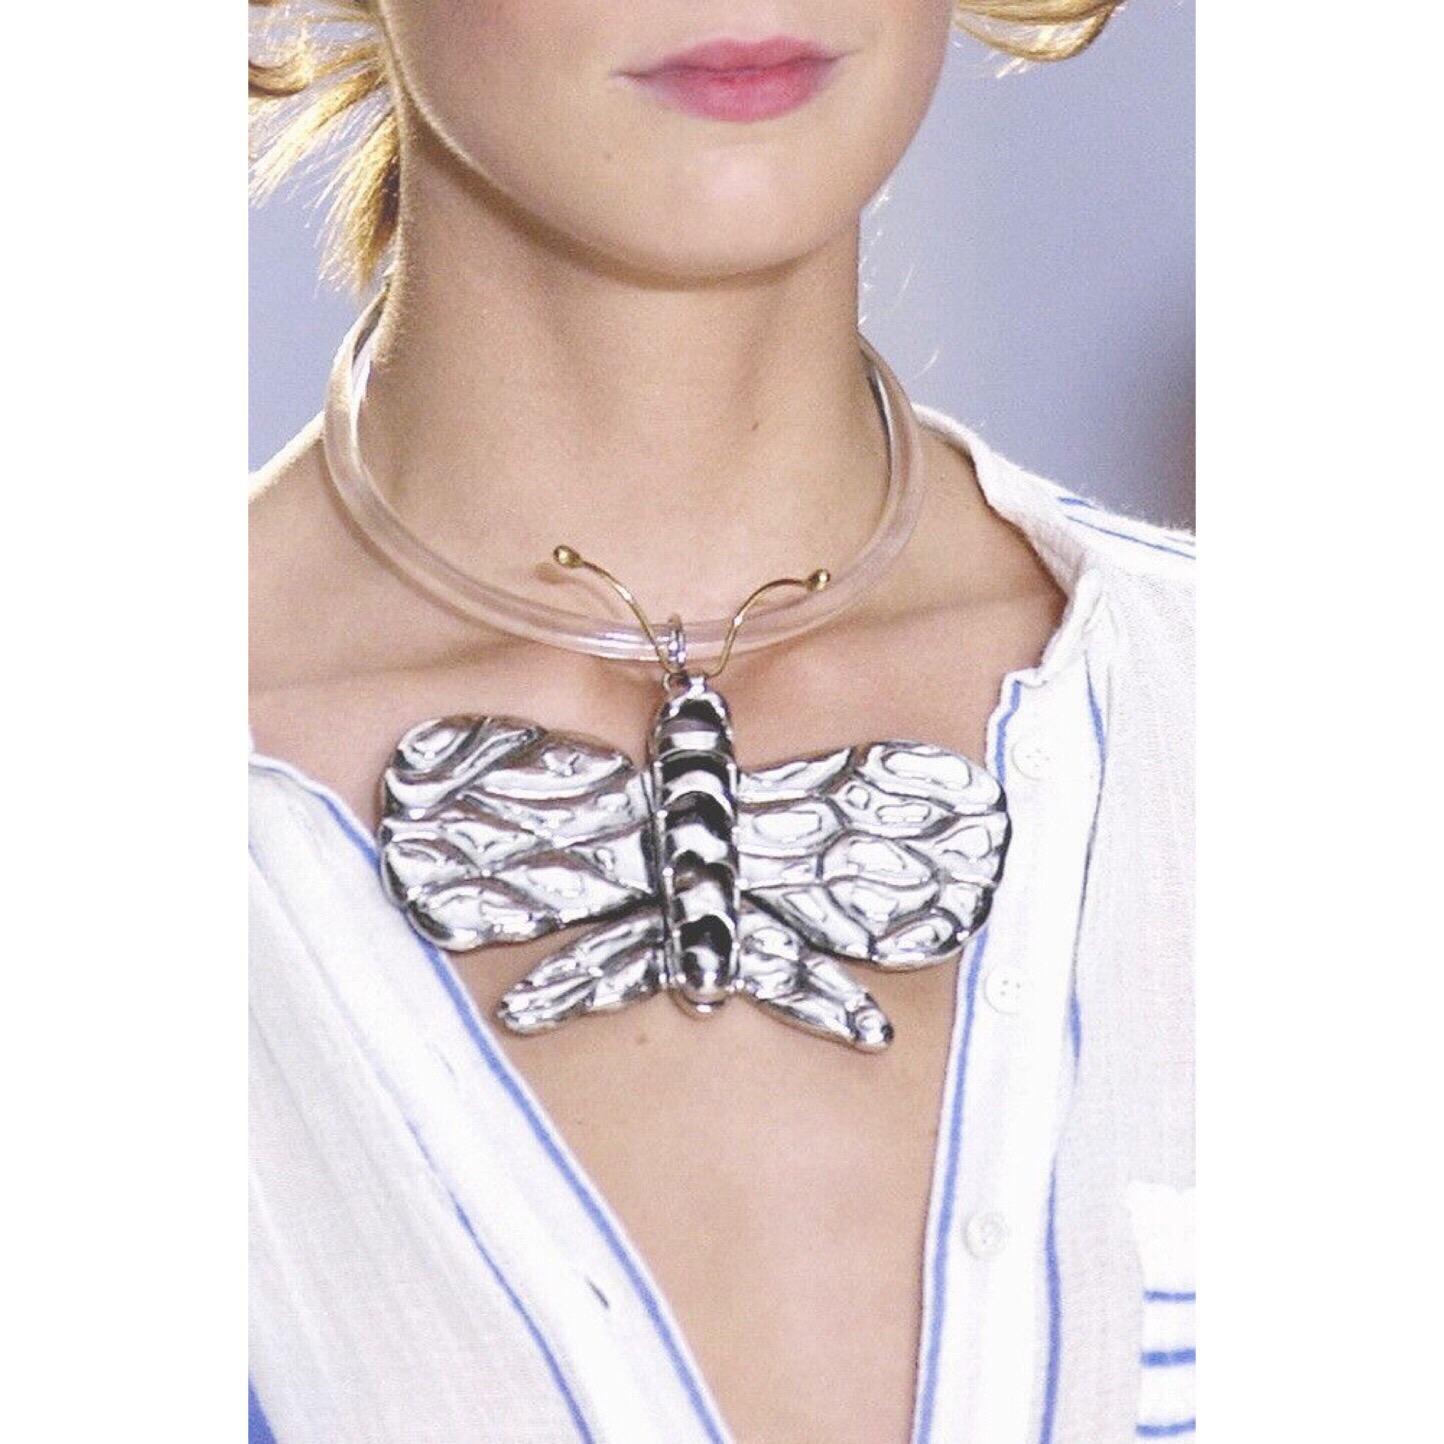 Women's Chloè Lucite Silver Butterfly Collar Necklace, 2004